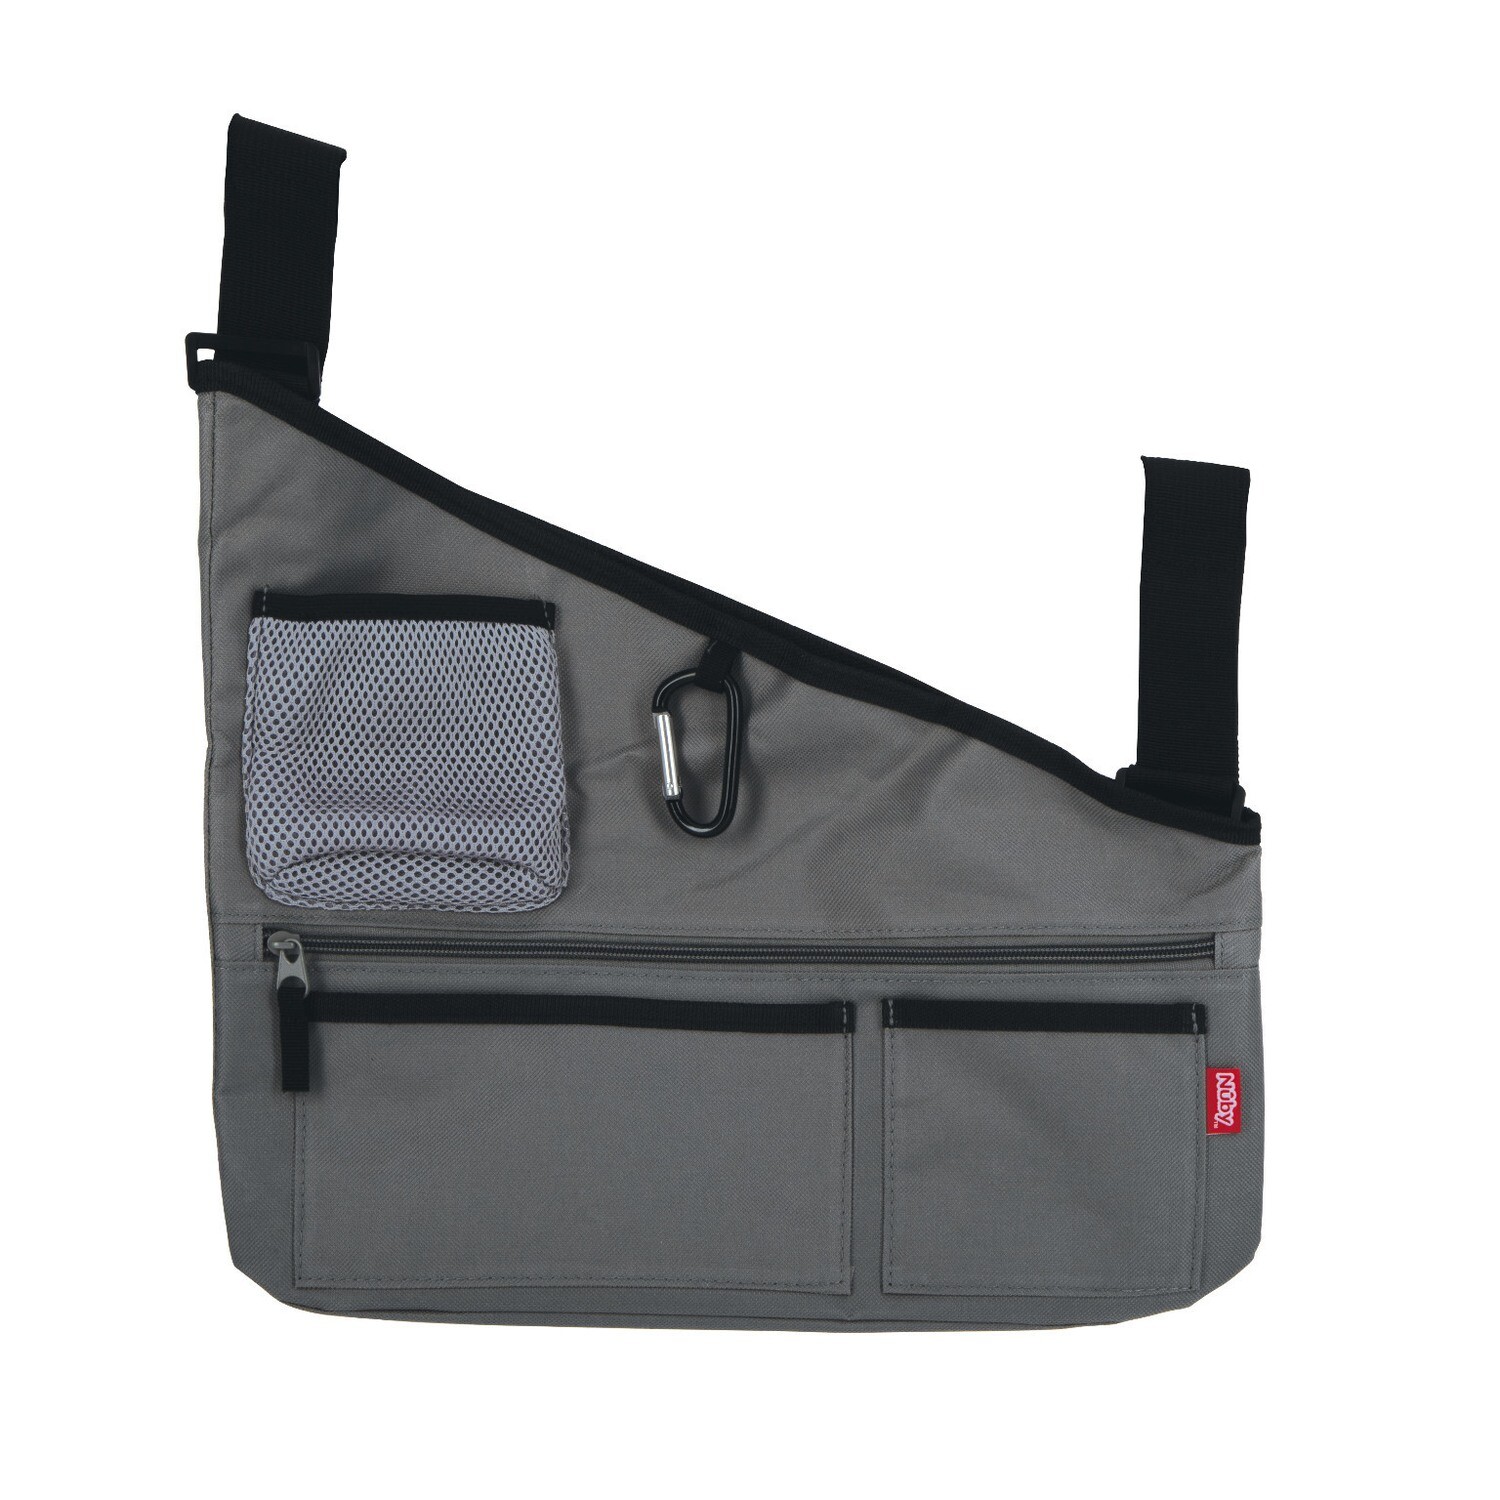 . Case of [24] Stroller Organizers - Side Fit, 2 Colors .